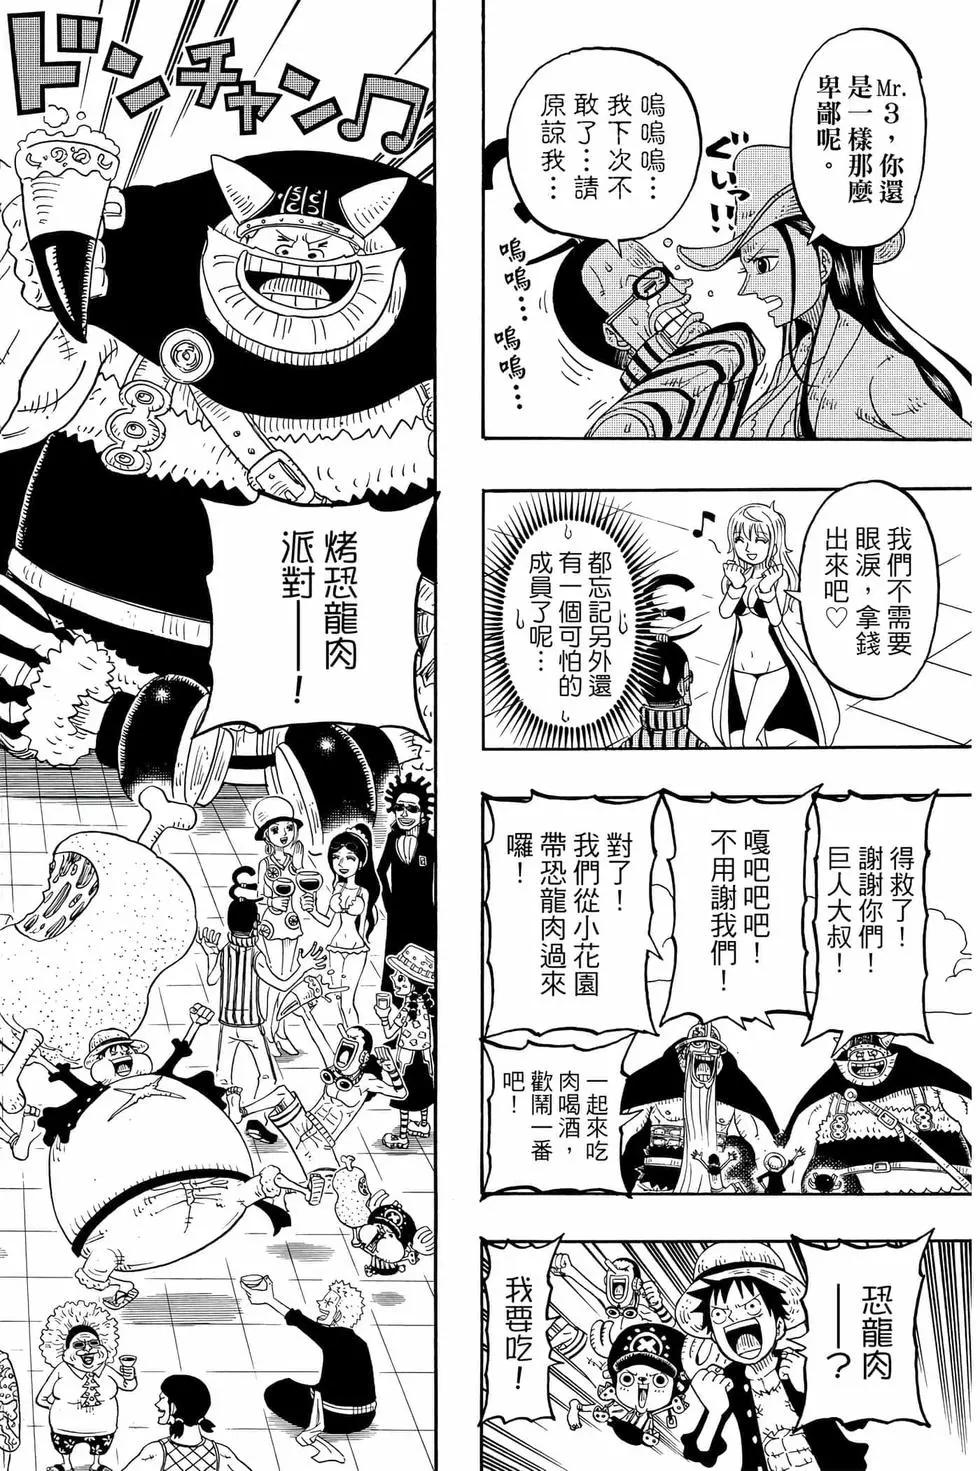 One piece party - 第04卷(2/4) - 1